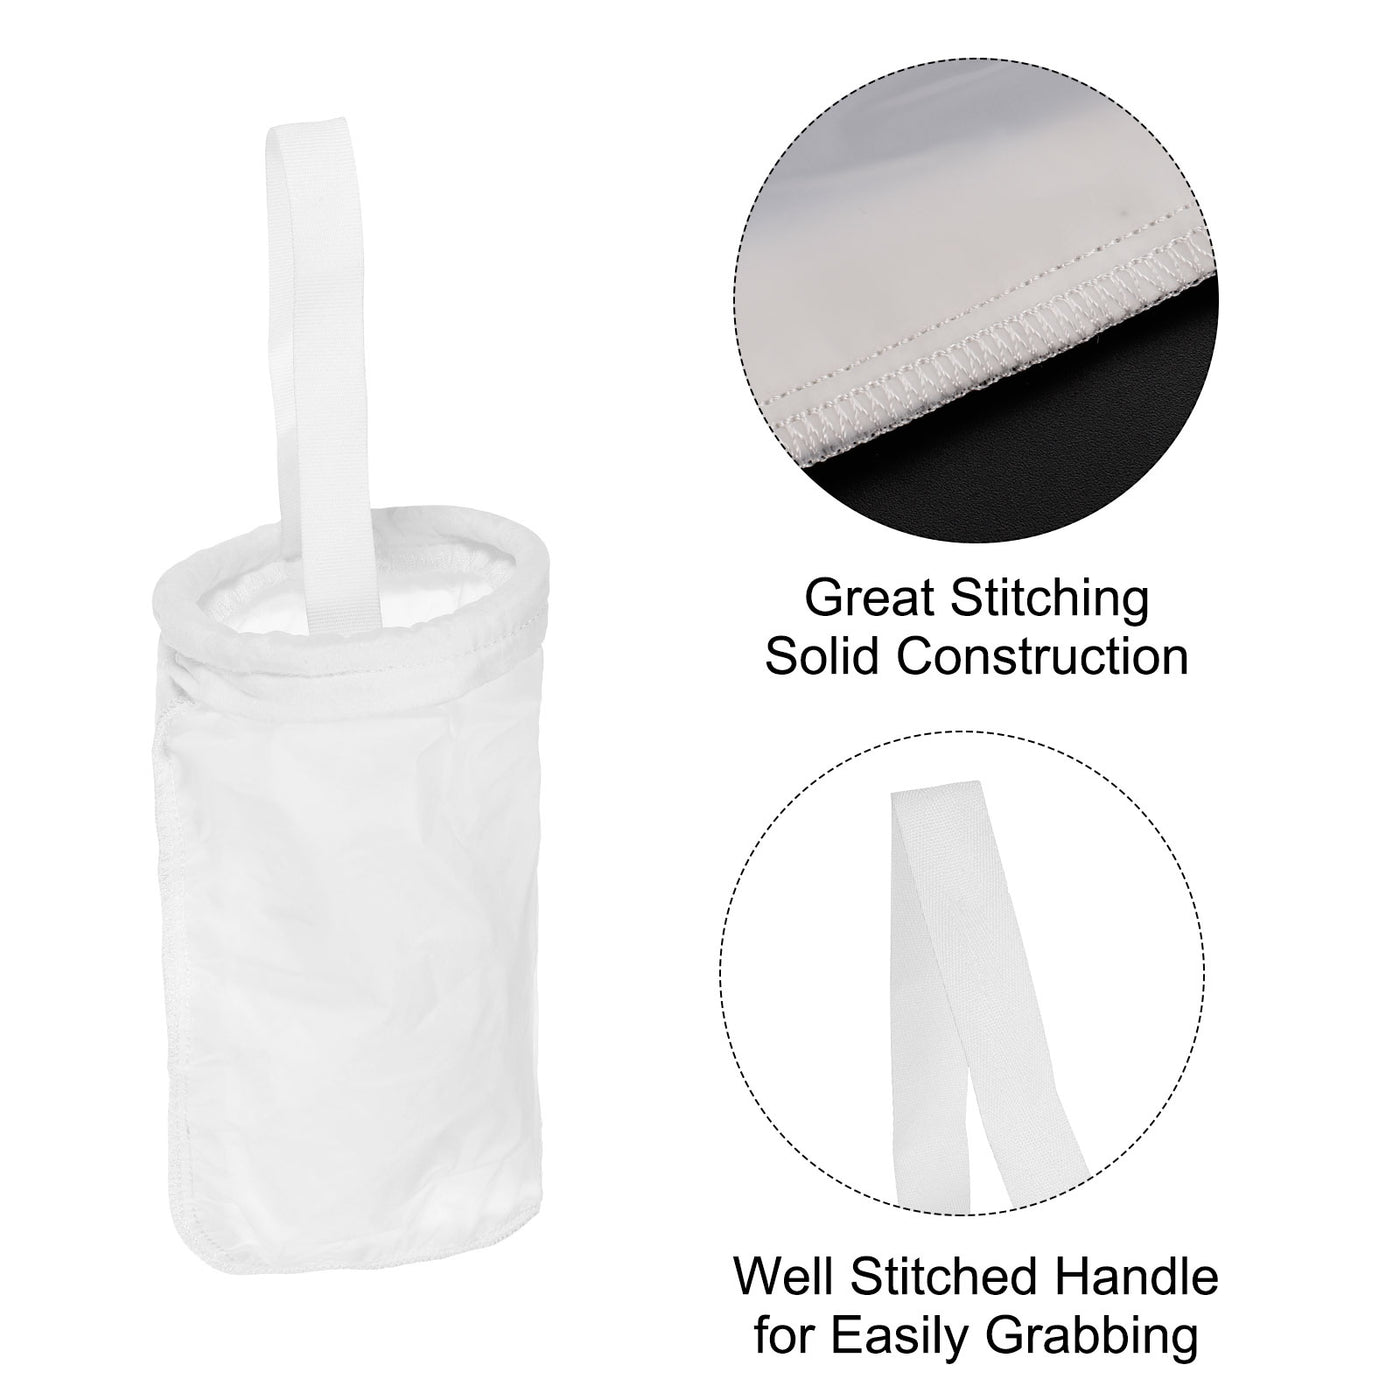 uxcell Uxcell Paint Filter Bag 450 Mesh (9.1"x4.1") Nylon Strainer for Filtering Paint